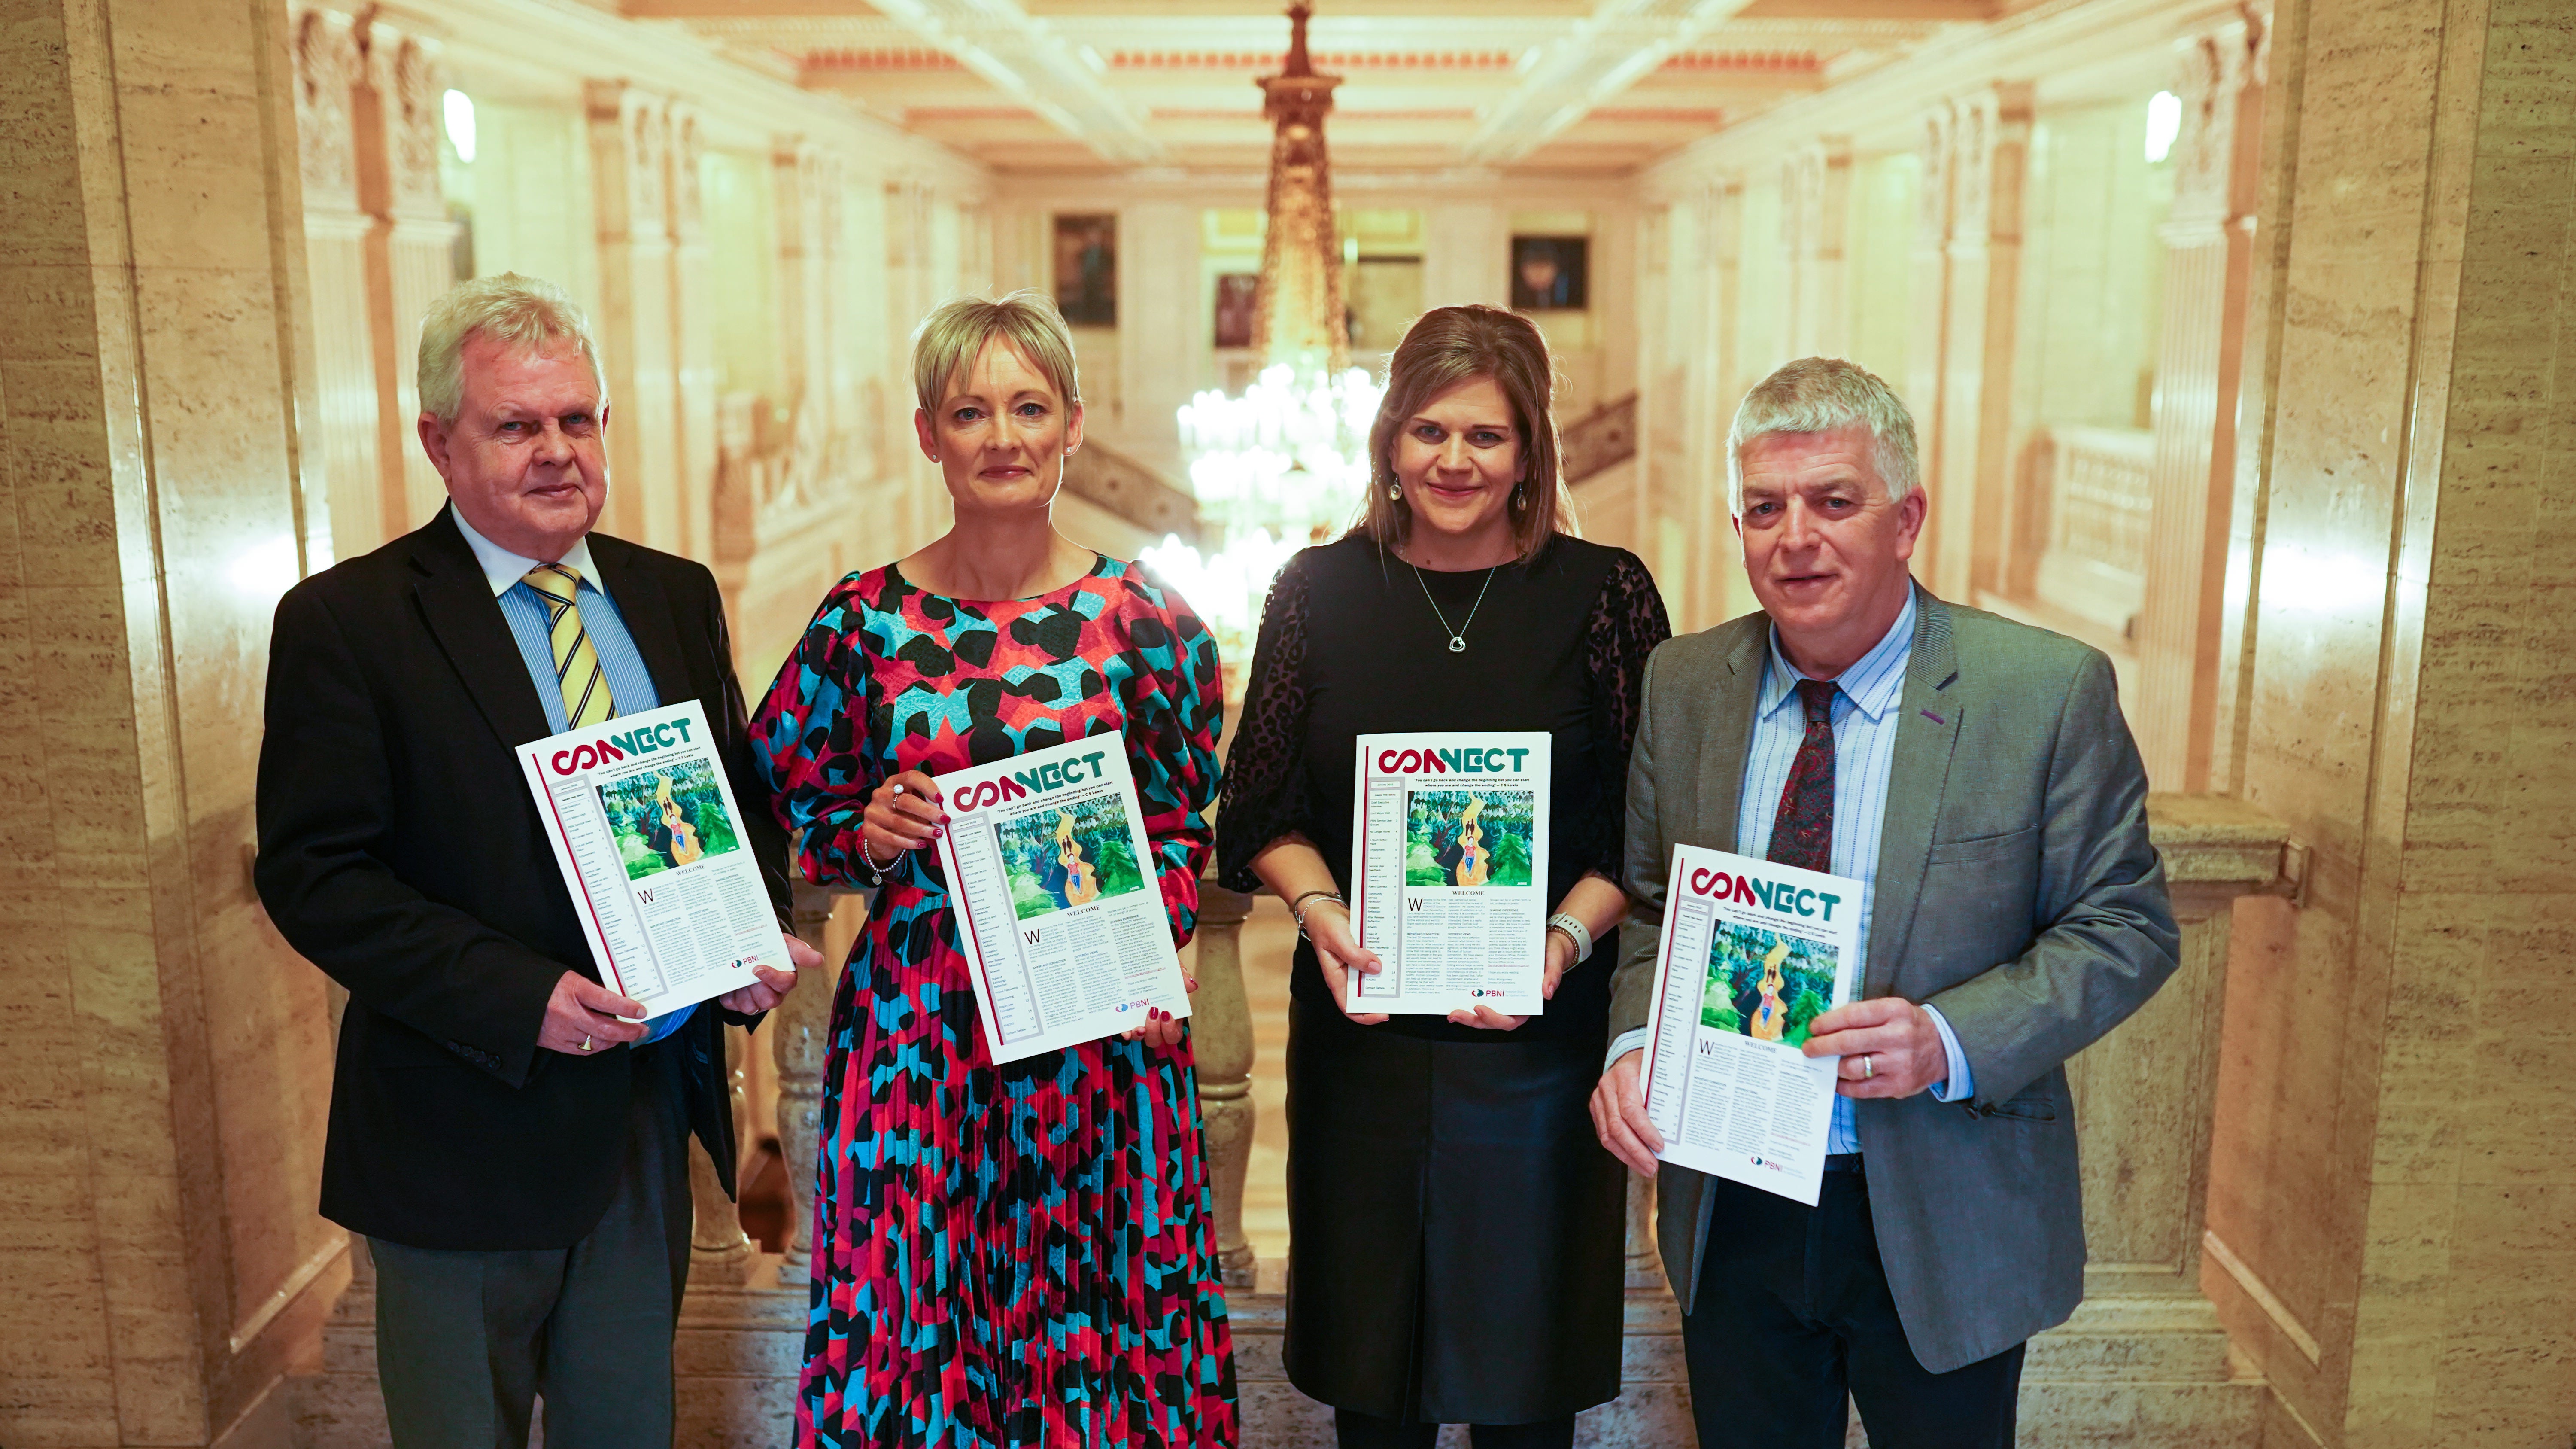 From left, Fred Caulfield, executive director of the Prison Arts Foundation, Amanda Stewart, PBNI chief executive, Gillian Montgomery, PBNI director of operations, and Professor Joe Duffy, senior social work lecturer at QUB, at the launch of the Connect newsletter at Stormont (PBNI/PA)